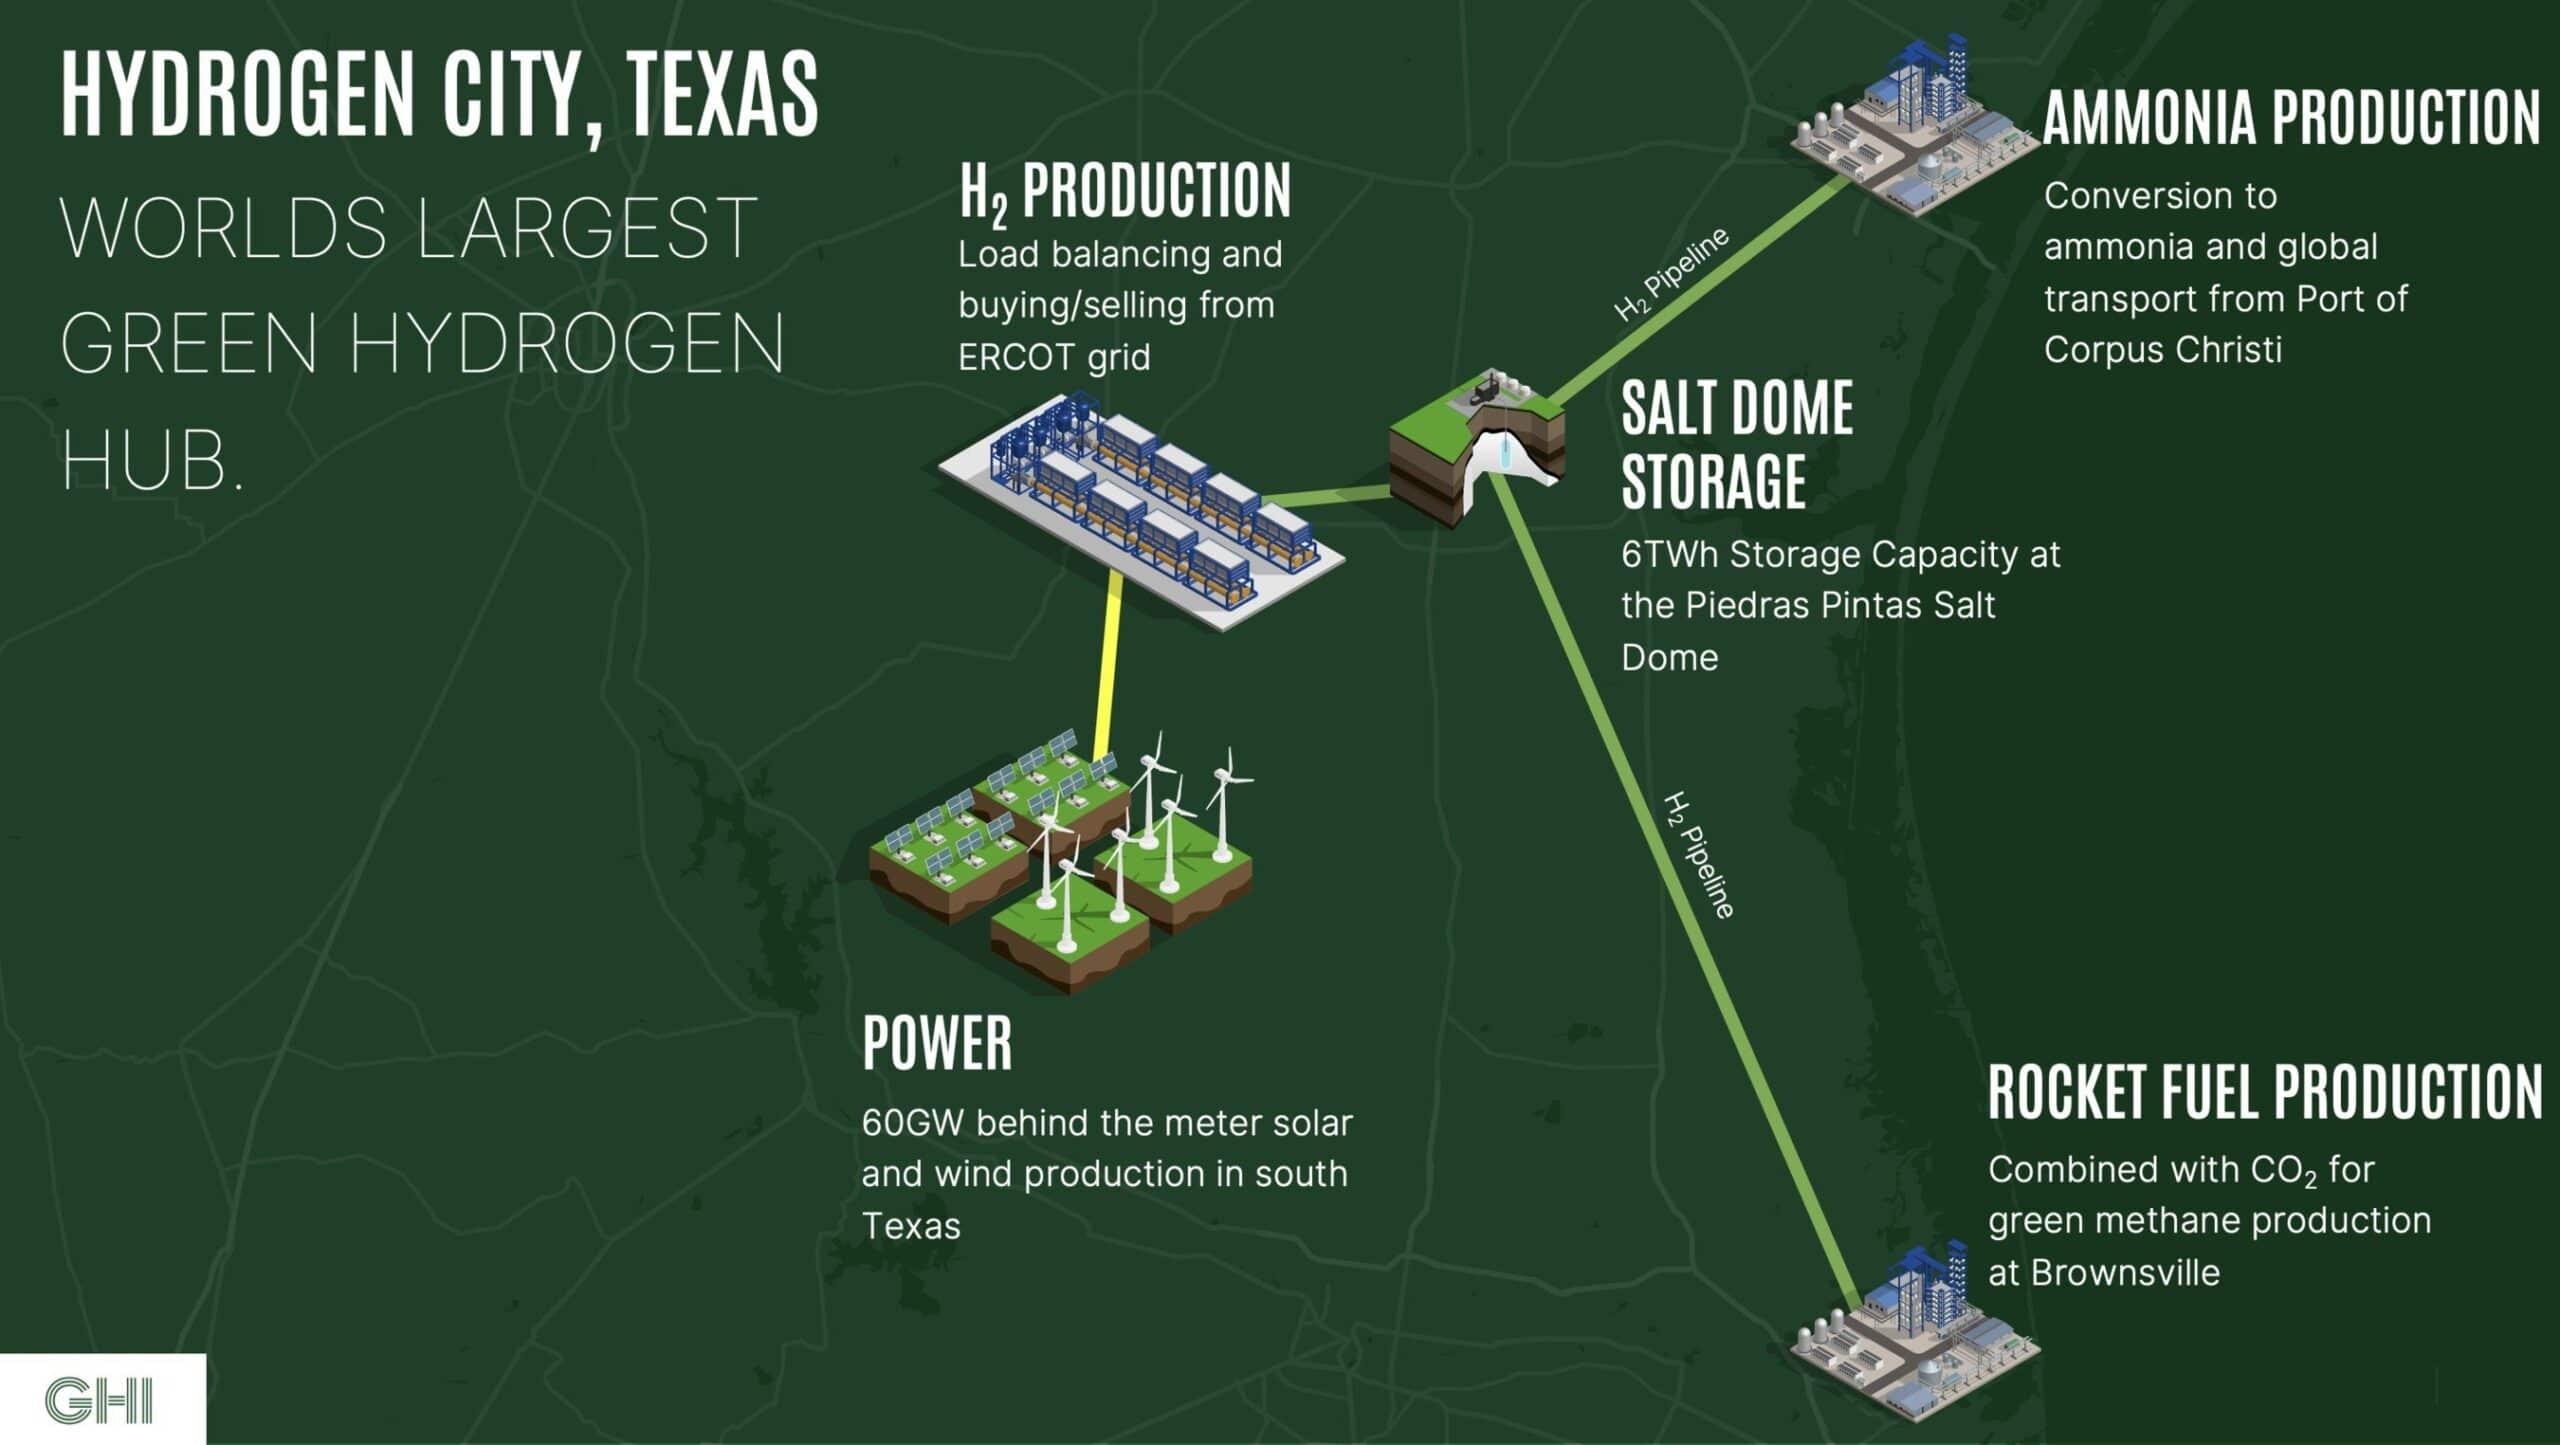 The world's largest green hydrogen production facility will be built in Texas